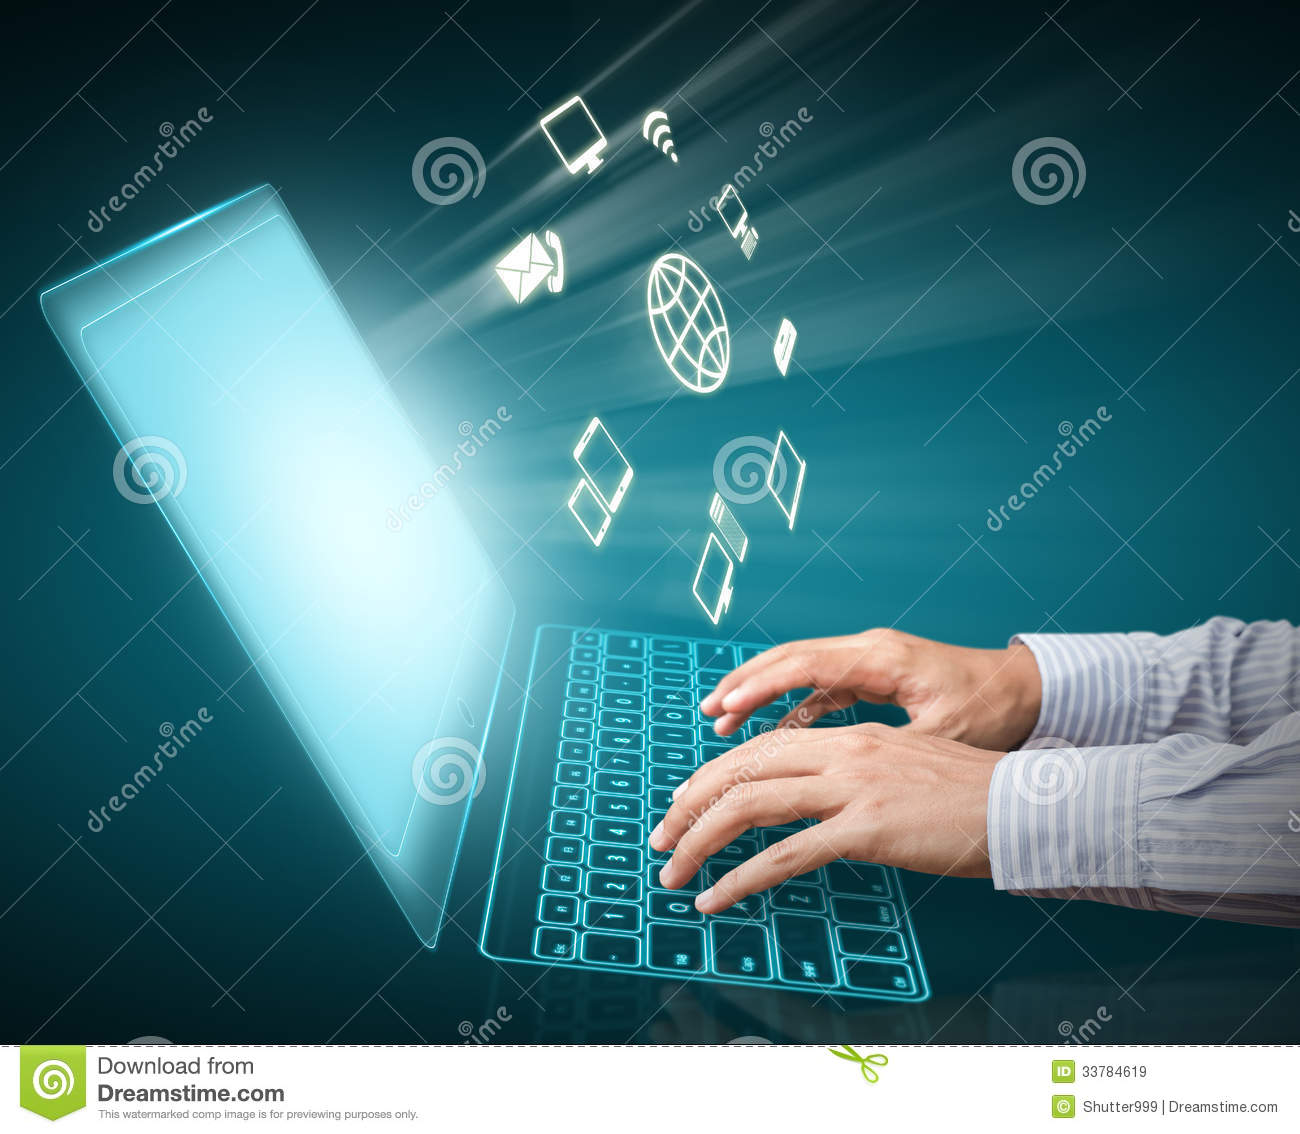 Computer Technology Royalty Free Stock Images